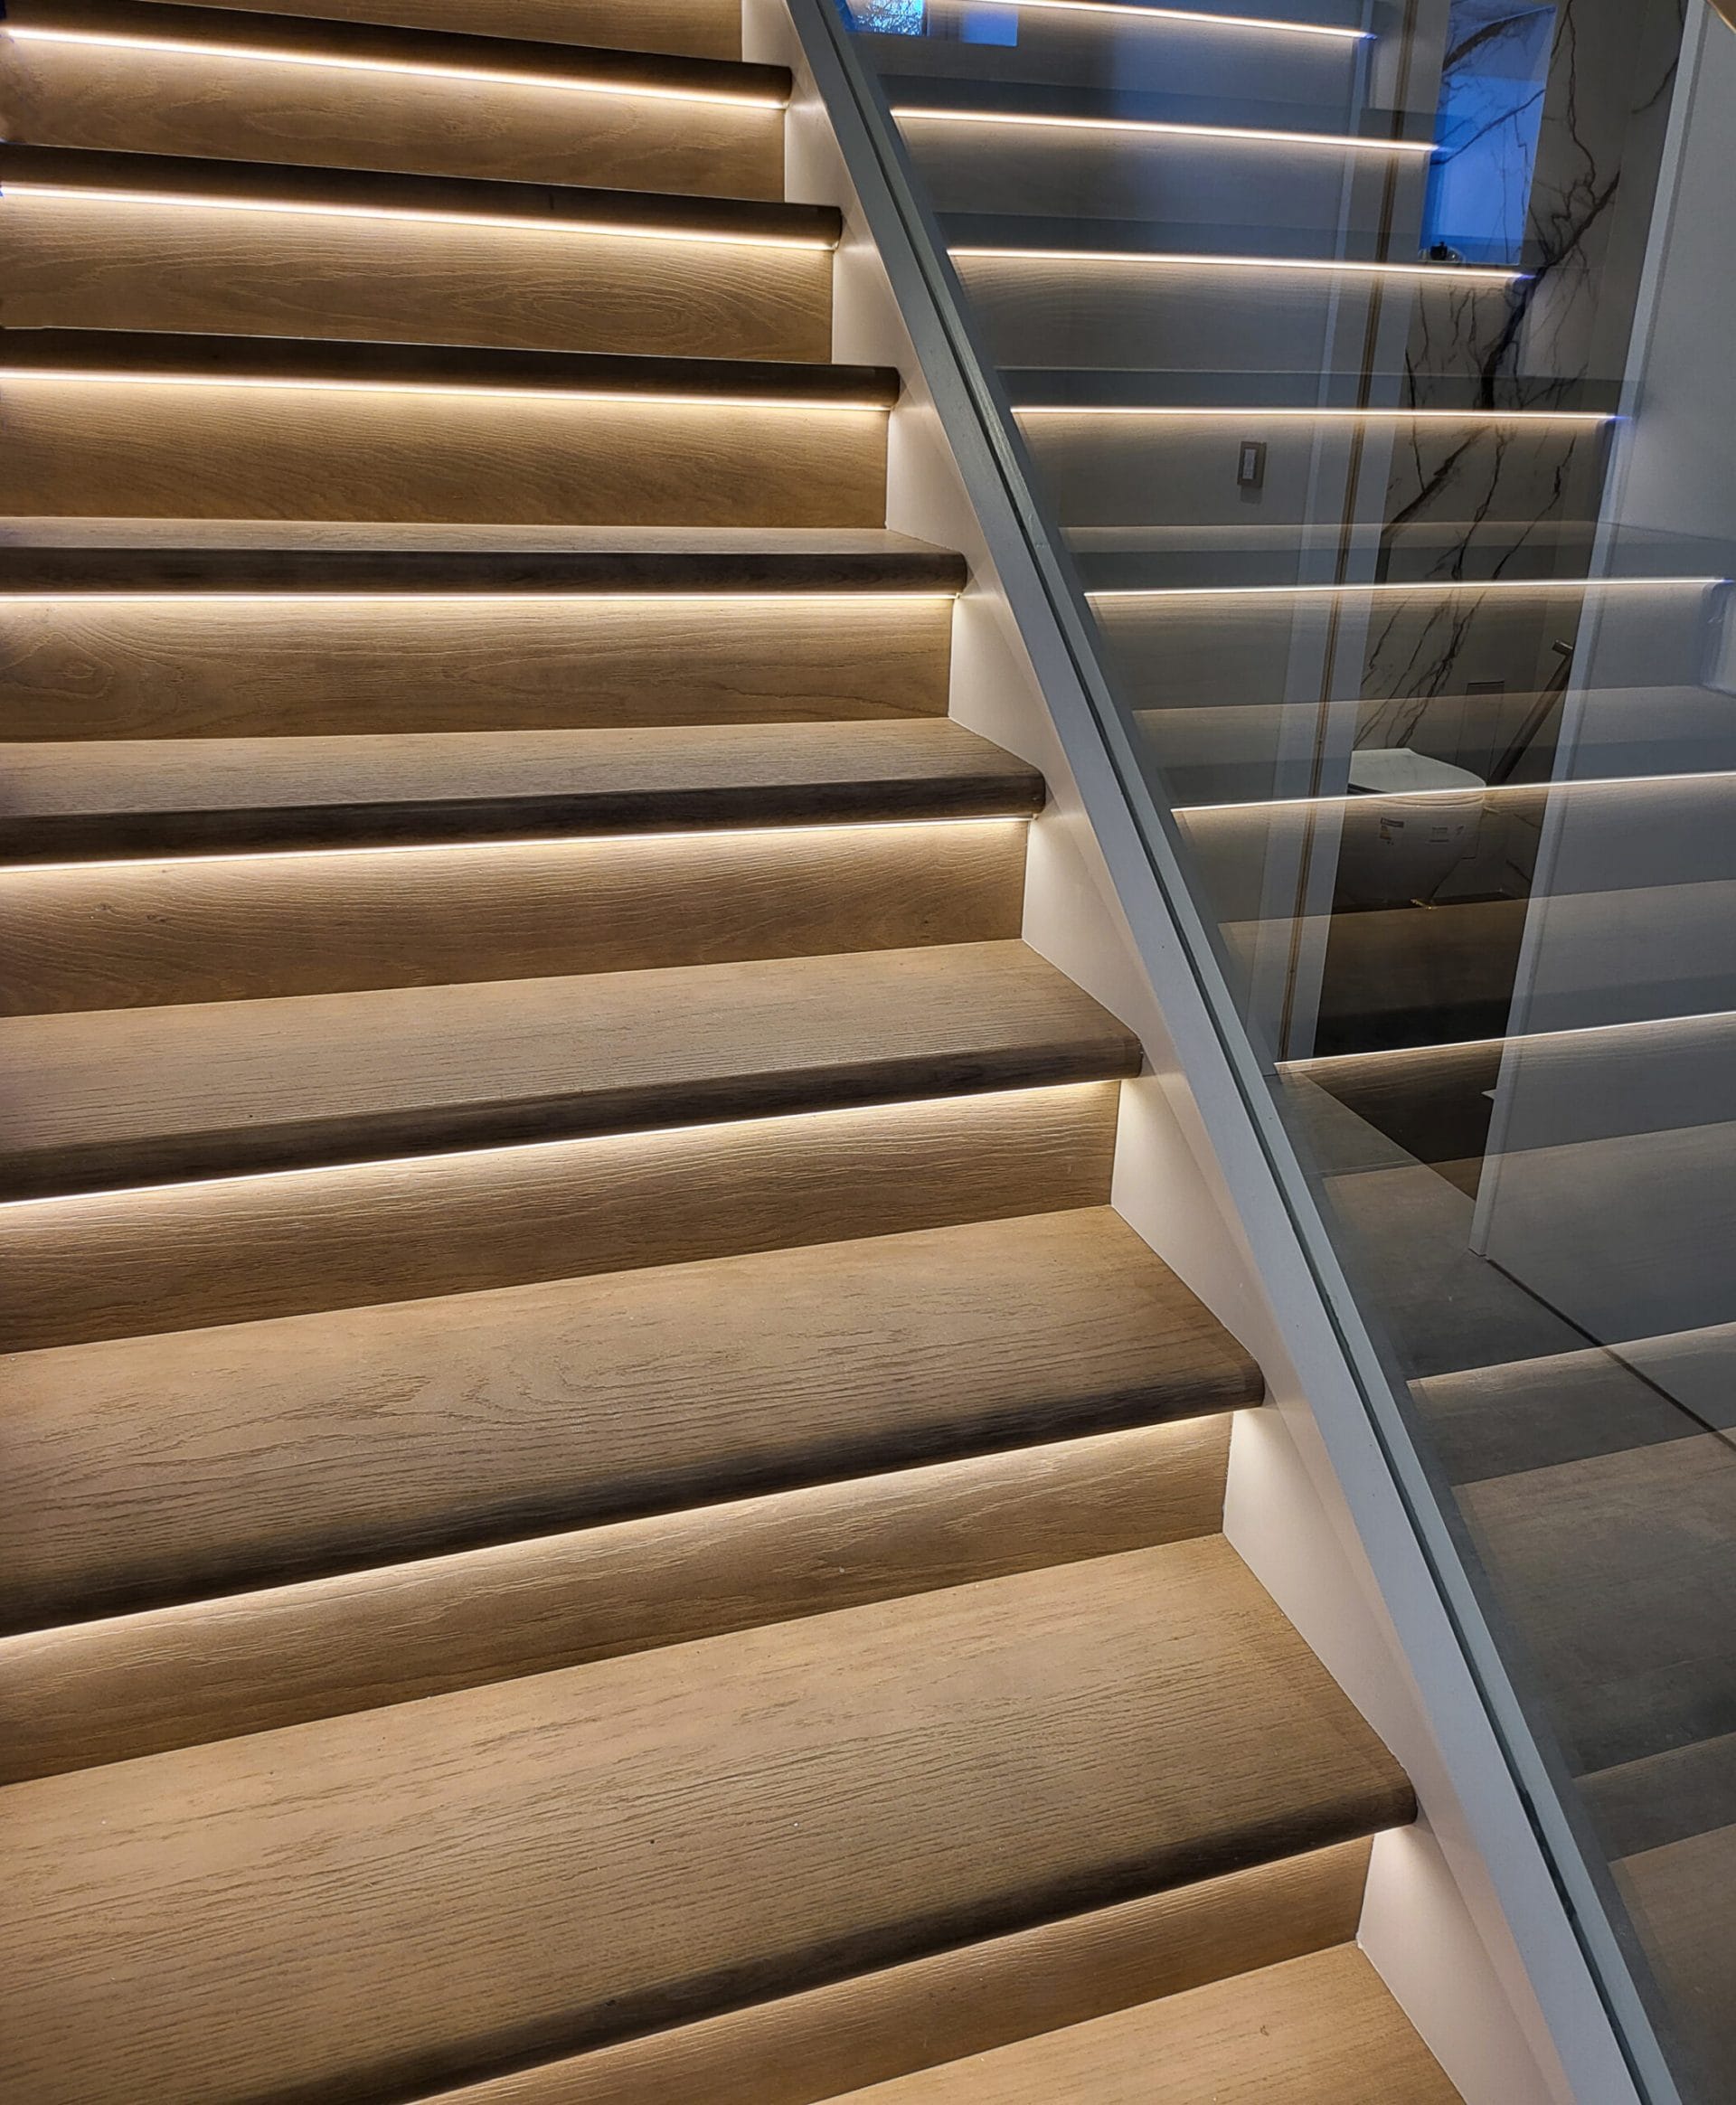 LED lighting recessed in stairs